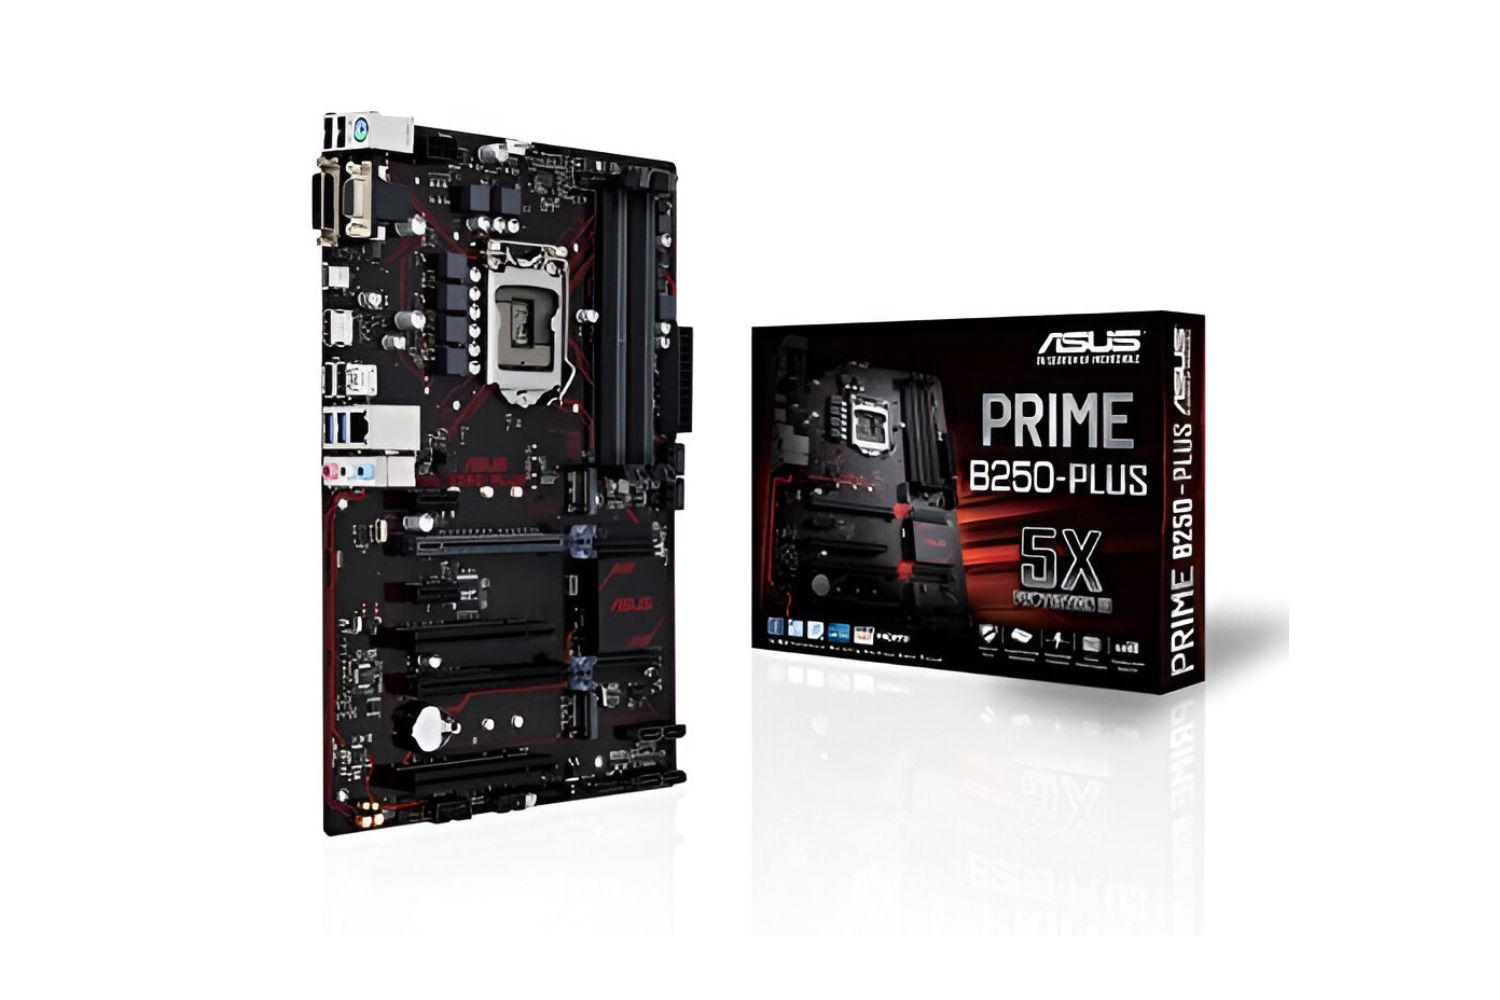 How Much Amps Can A CPU Cooler Be For An Asus Prime B250 Motherboard